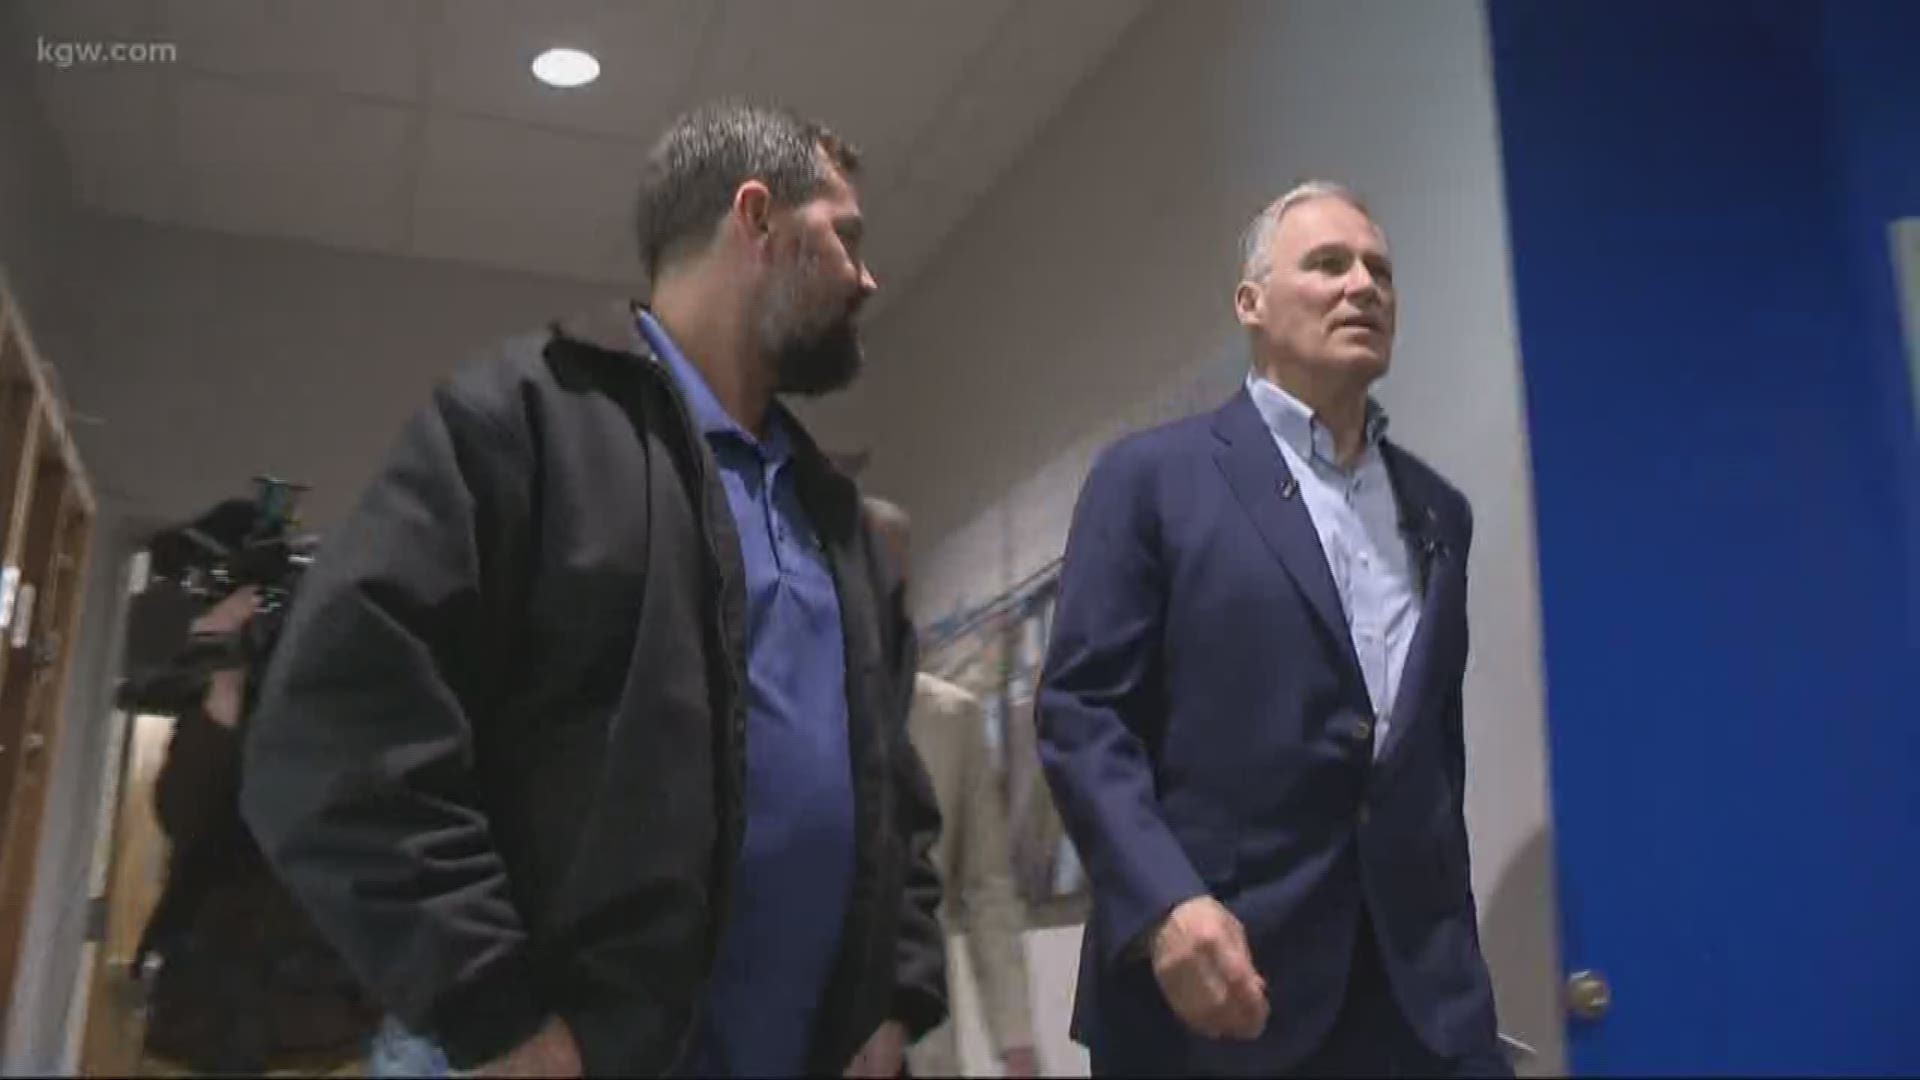 Washington Gov. Jay Inslee toured IBEW Local 48 in Portland as part of “Climate Mission Tour” stop during presidential campaign.